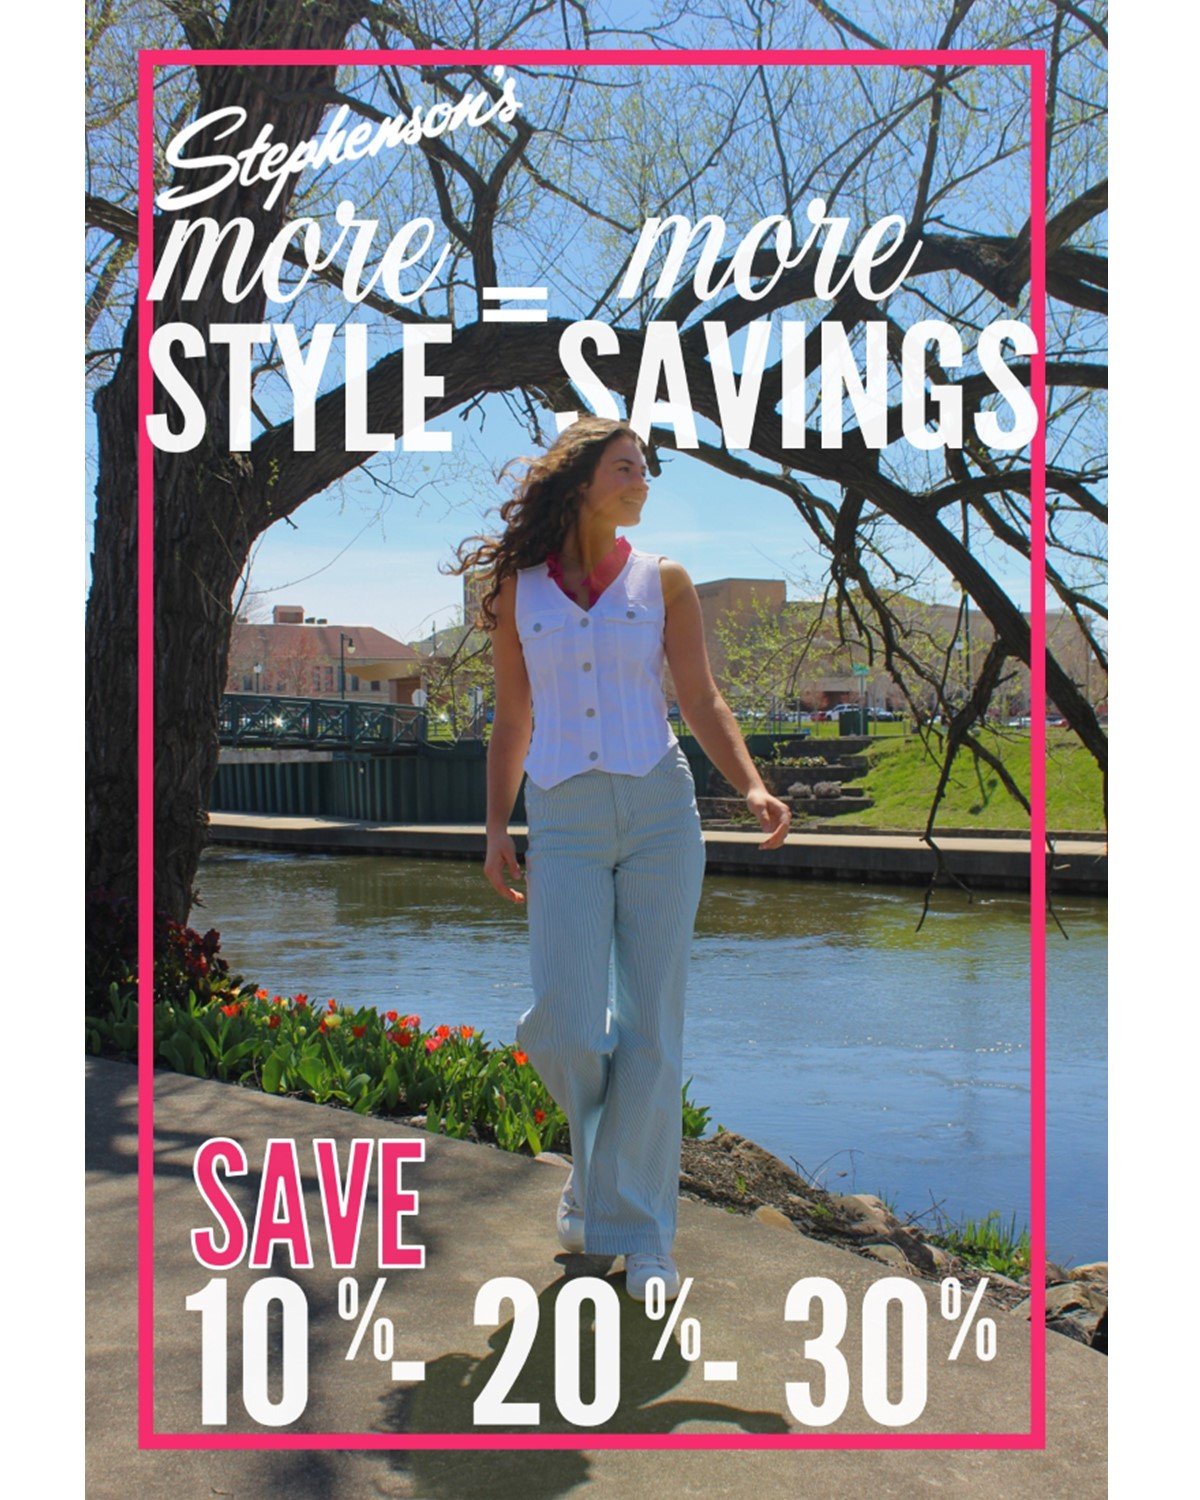 Join us now through May fourth, and save on all new spring and summer fashions!! The more you shop the more you save...
🌸 Save 10% on one item
🌸🌸 Save 20% on two items
🌸🌸🌸 Save 30% on three items

We can't wait to see you soon!!

#springfashion